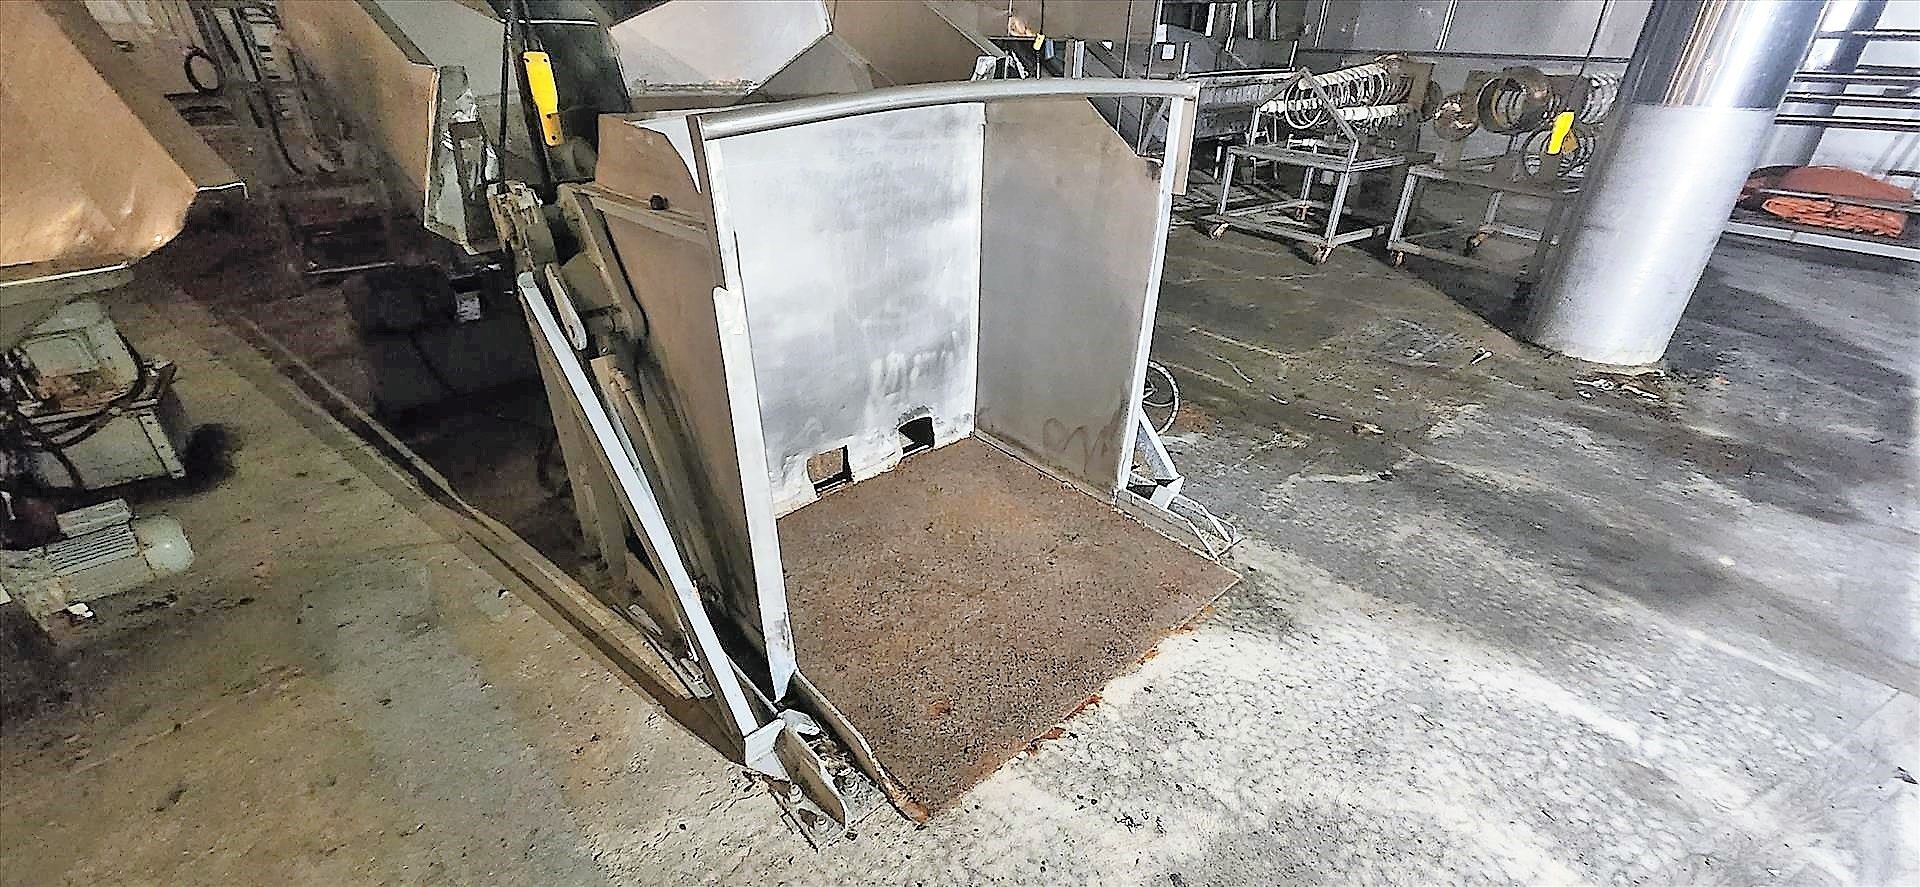 tote dumper, stainless steel, approx. 48 in. x 52 in. x 42 in. pivot point c/w 5 hp hydraulic